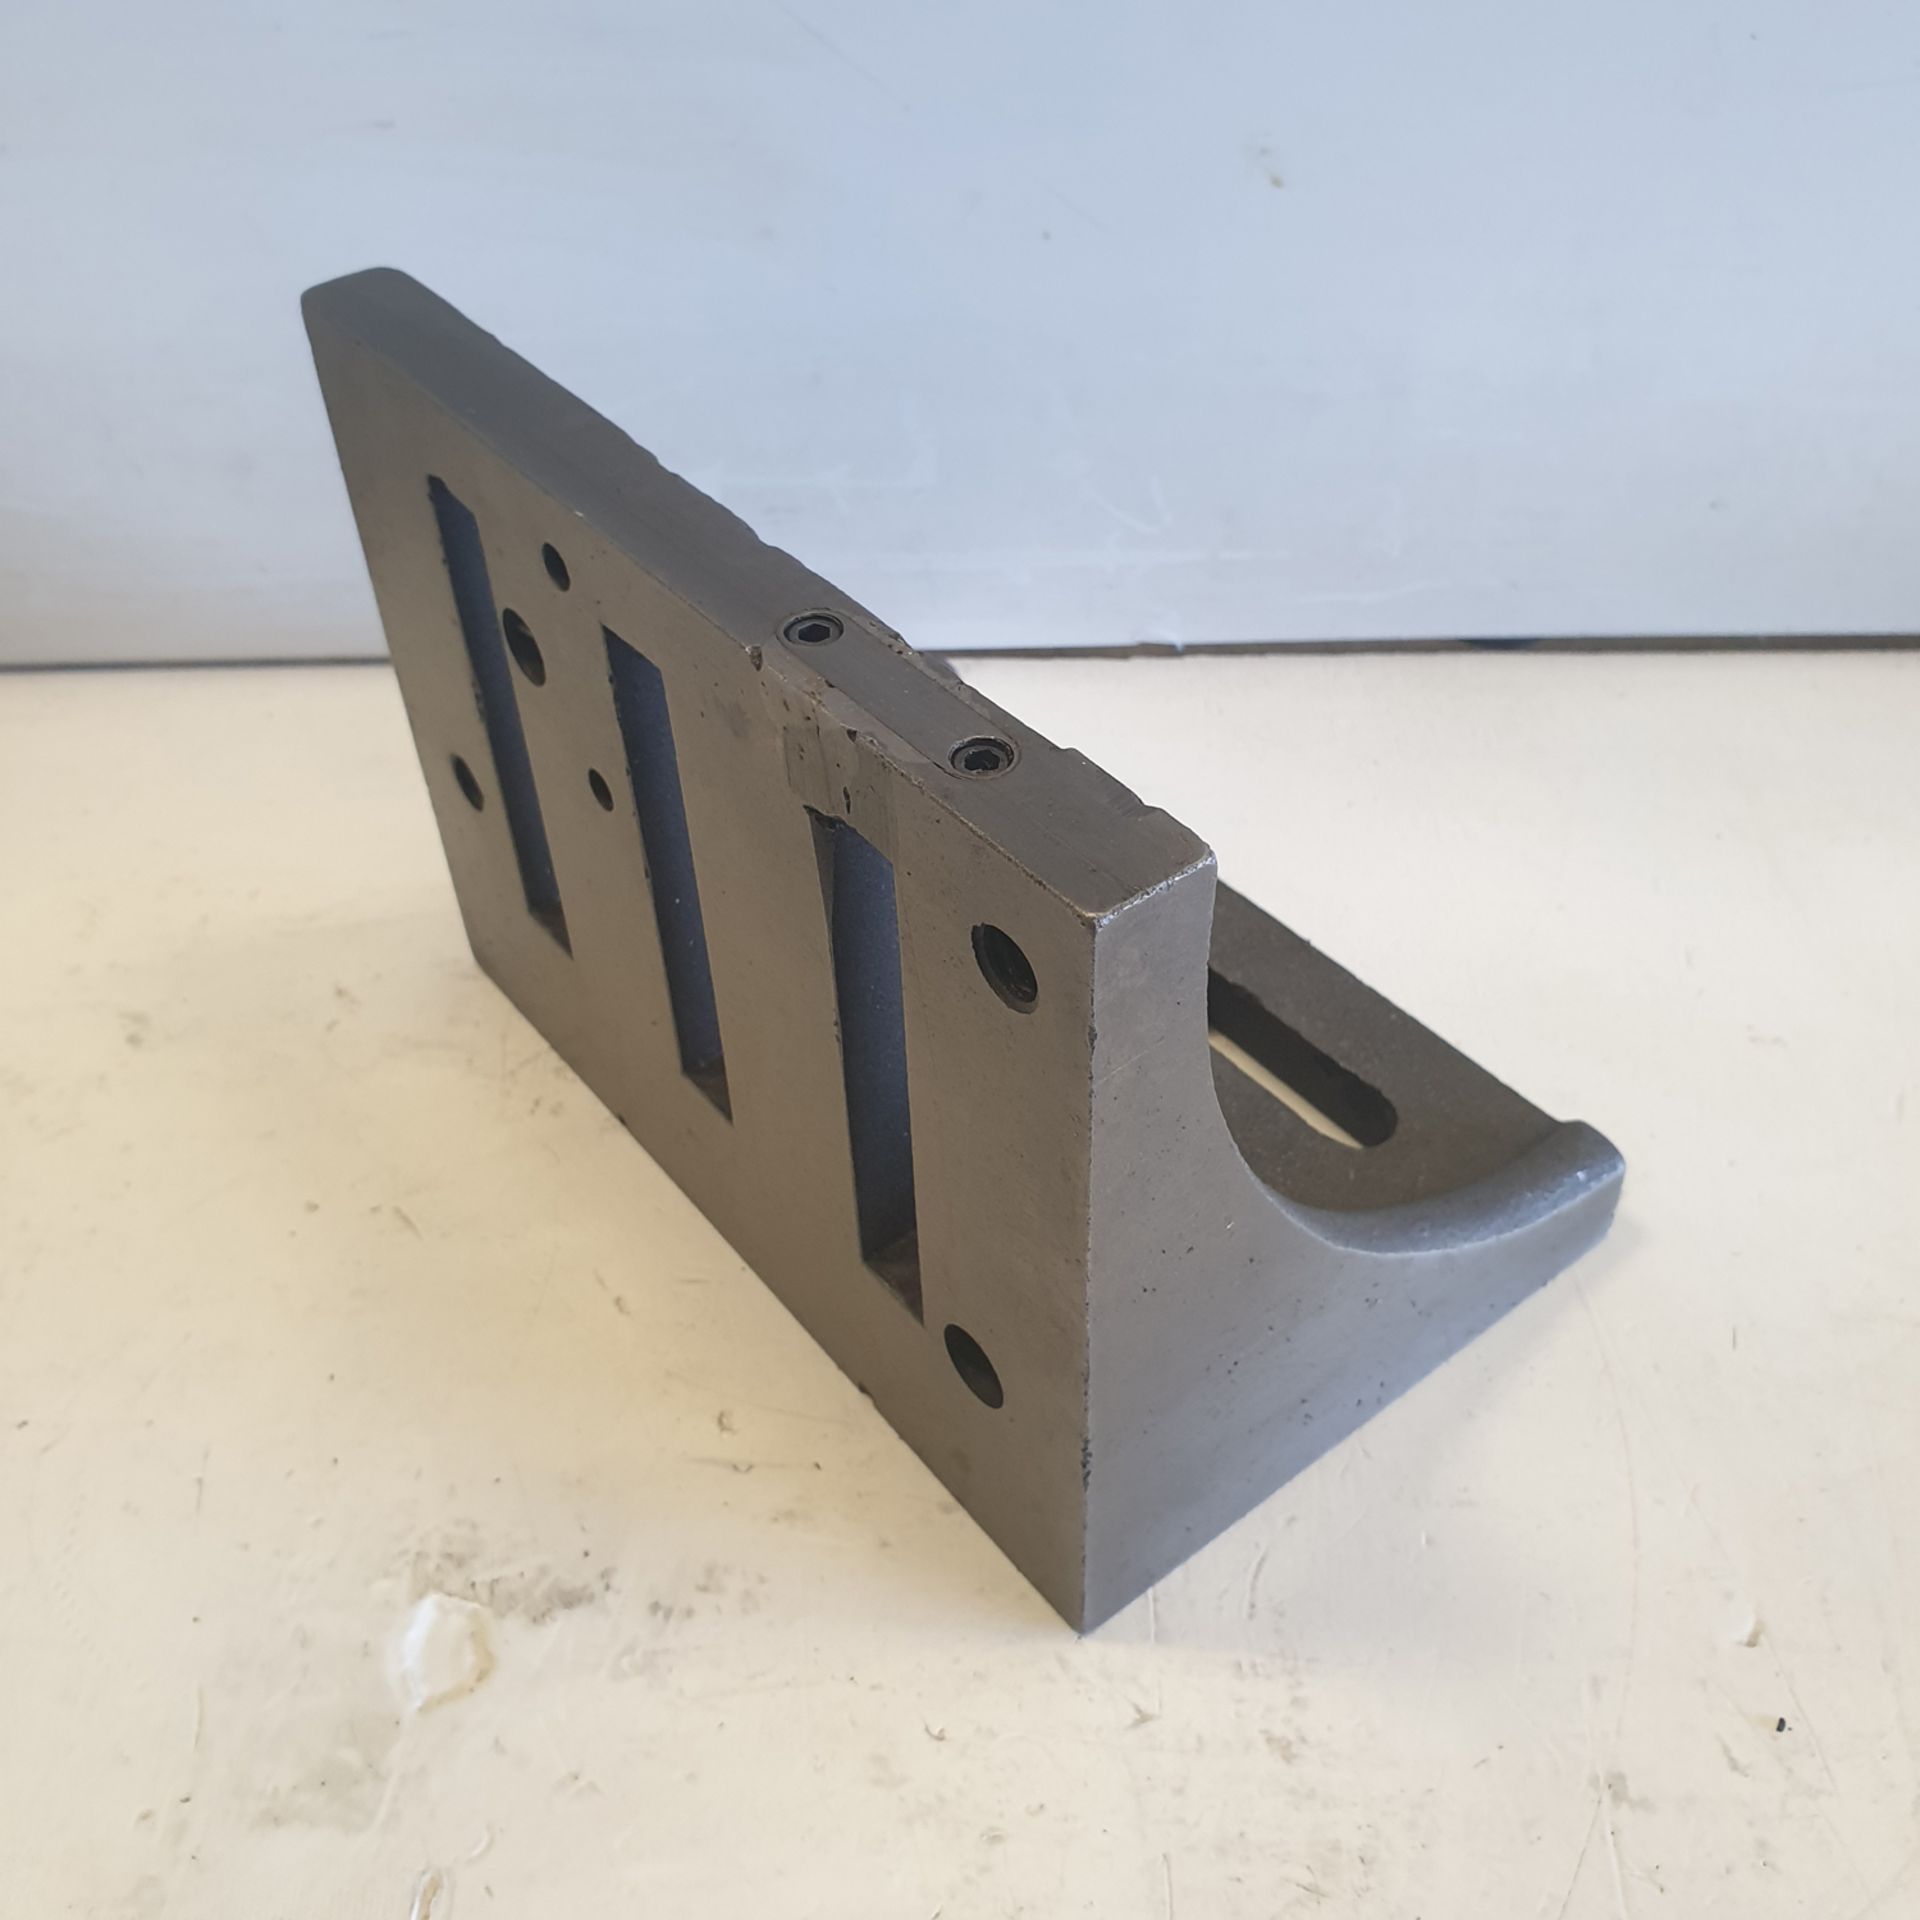 Slotted Angle Plate. Approx Dimensions 8" x 6", 8" x 5". - Image 3 of 6